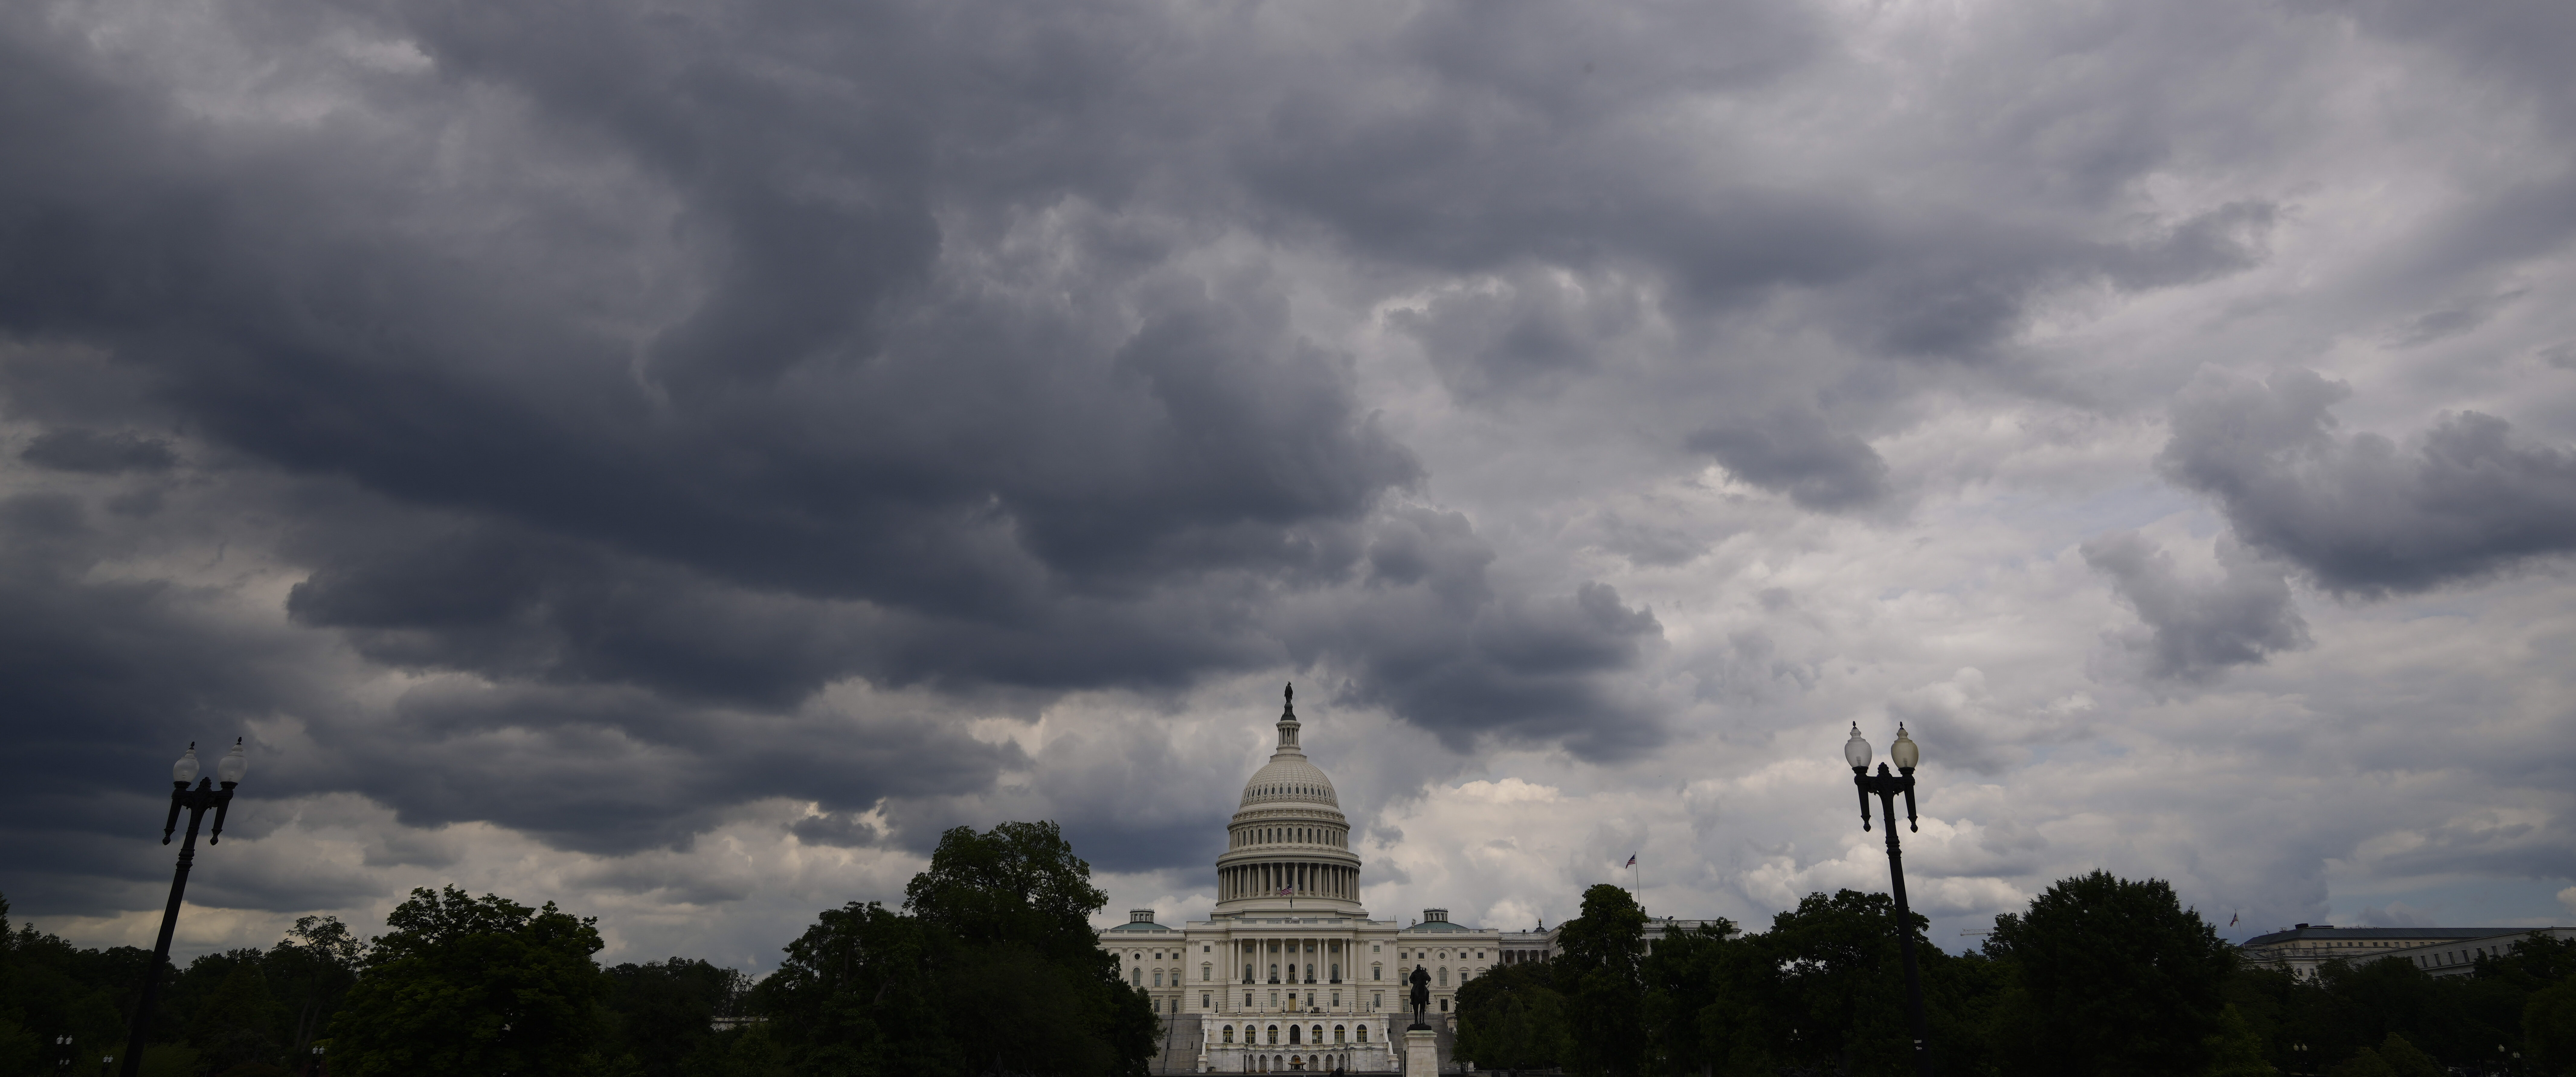 Dark clouds over the U.S. Capitol, Washington, DC, May 17, 2021 (Drew Angerer/Getty Images)